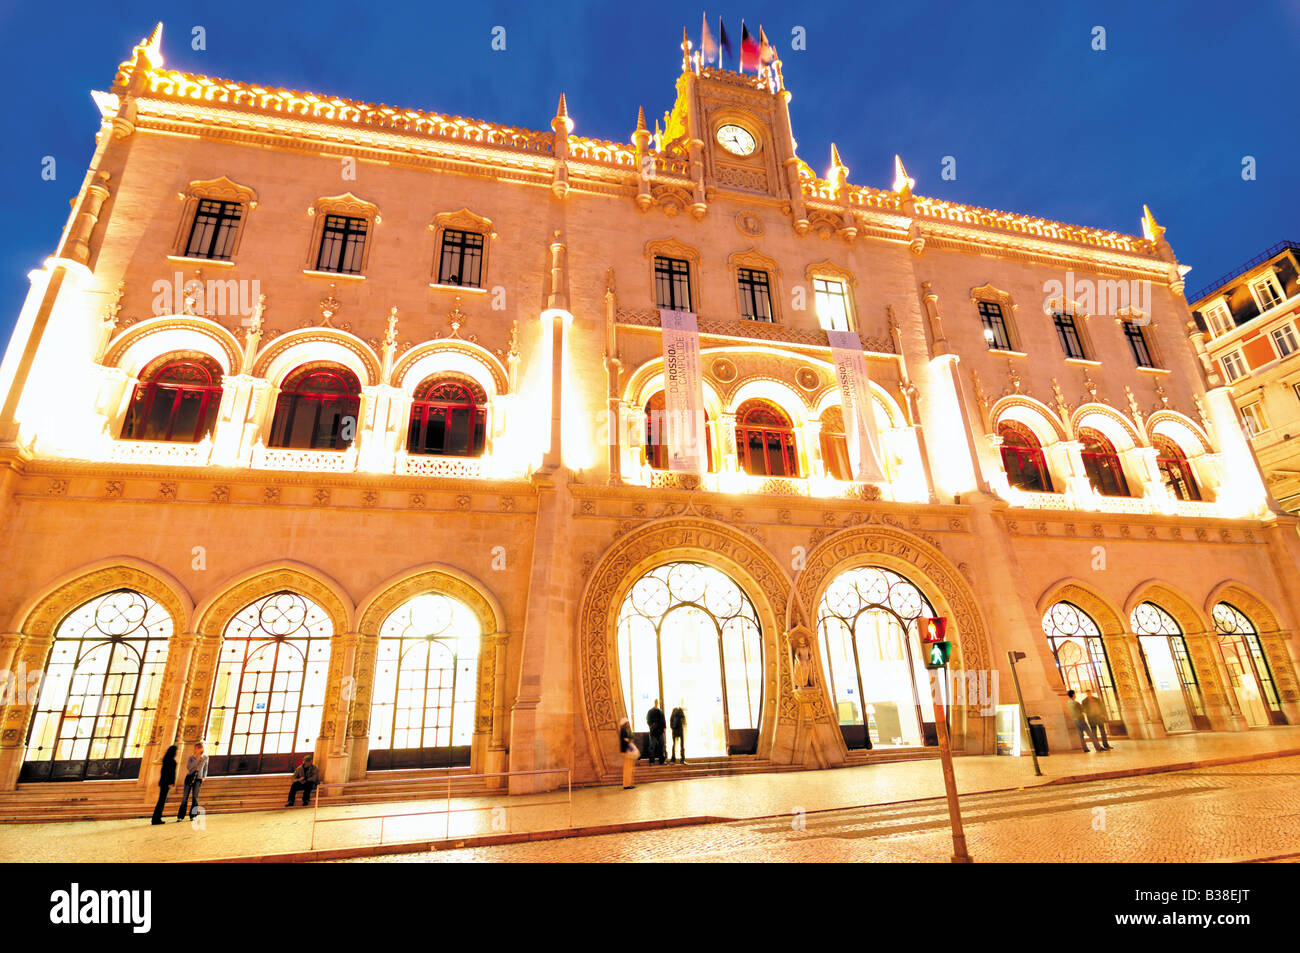 Lisbons historic Train Station Rossio by night Stock Photo